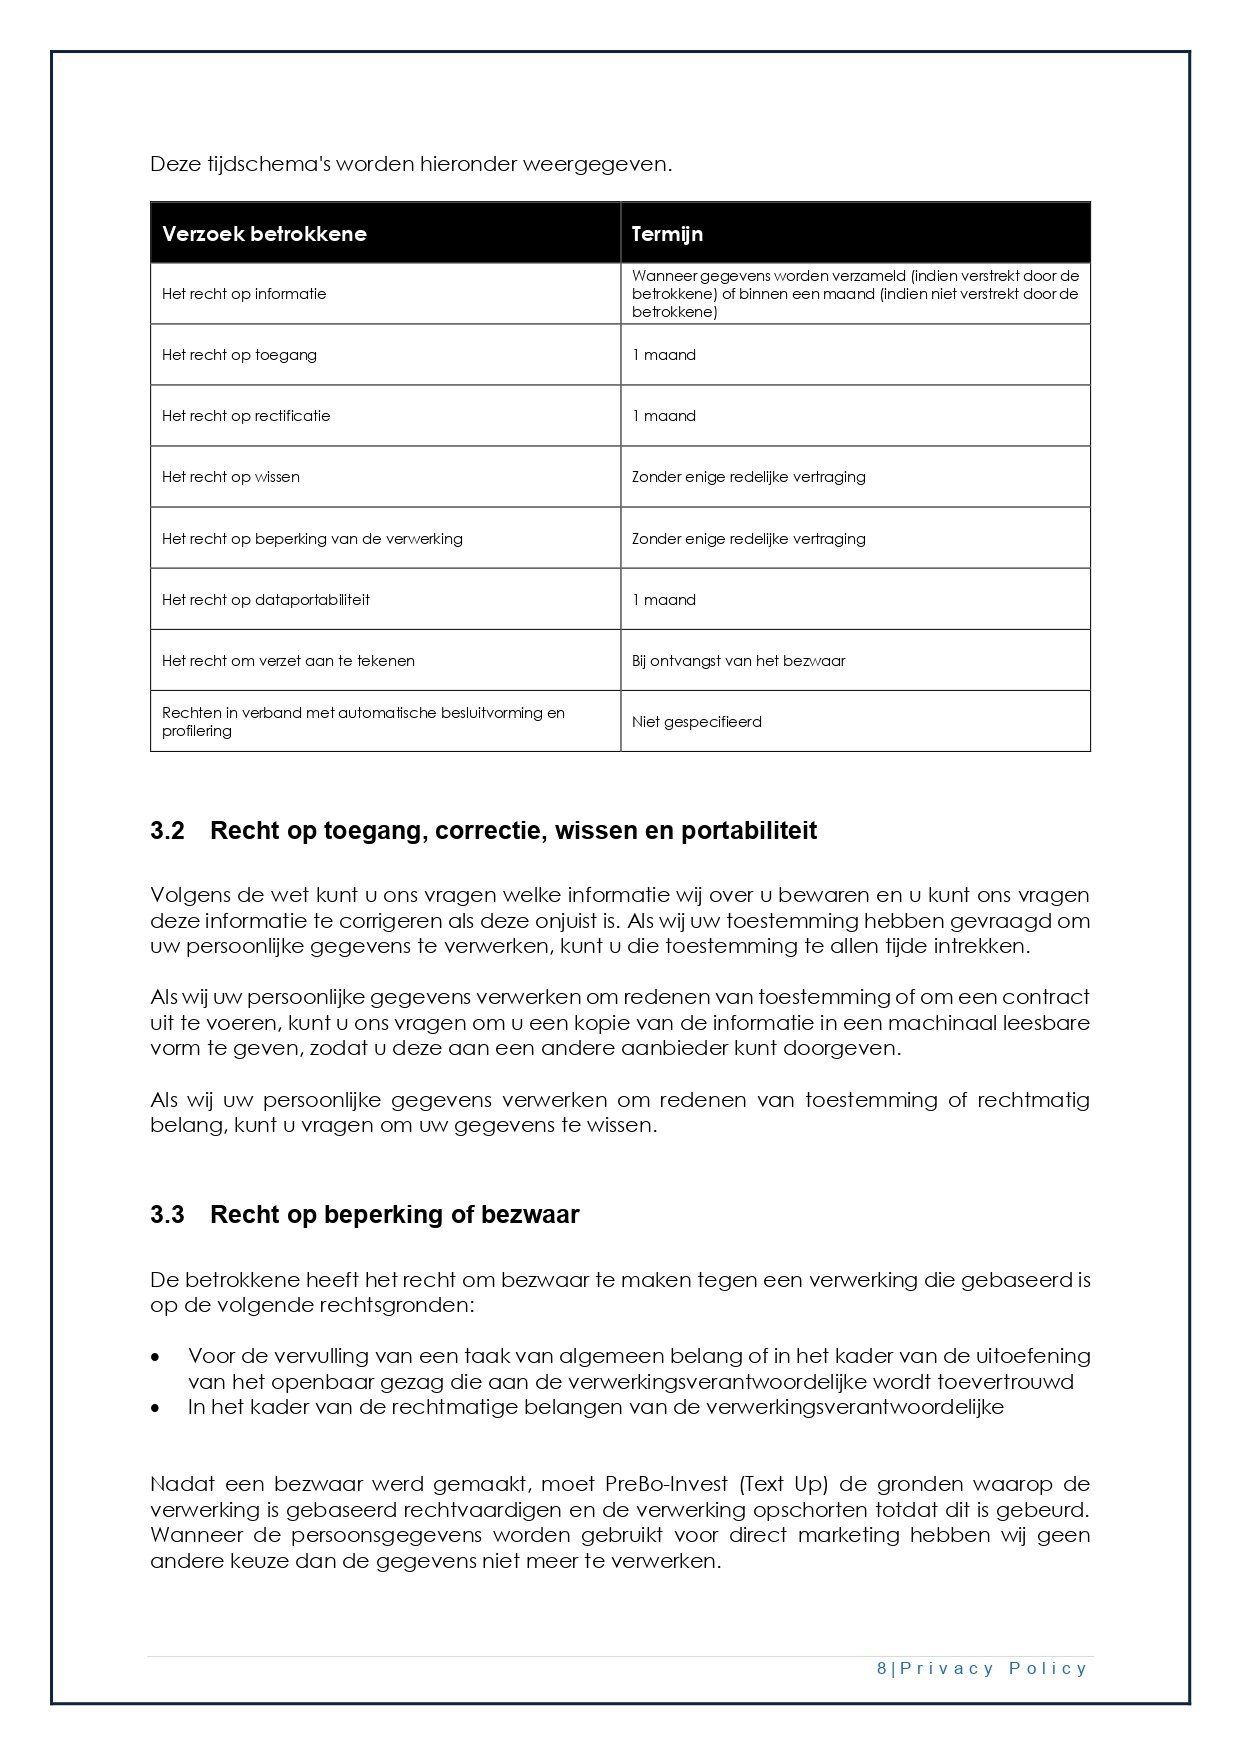 02 Privacy Policy textup.be NL V1.0 page 0008